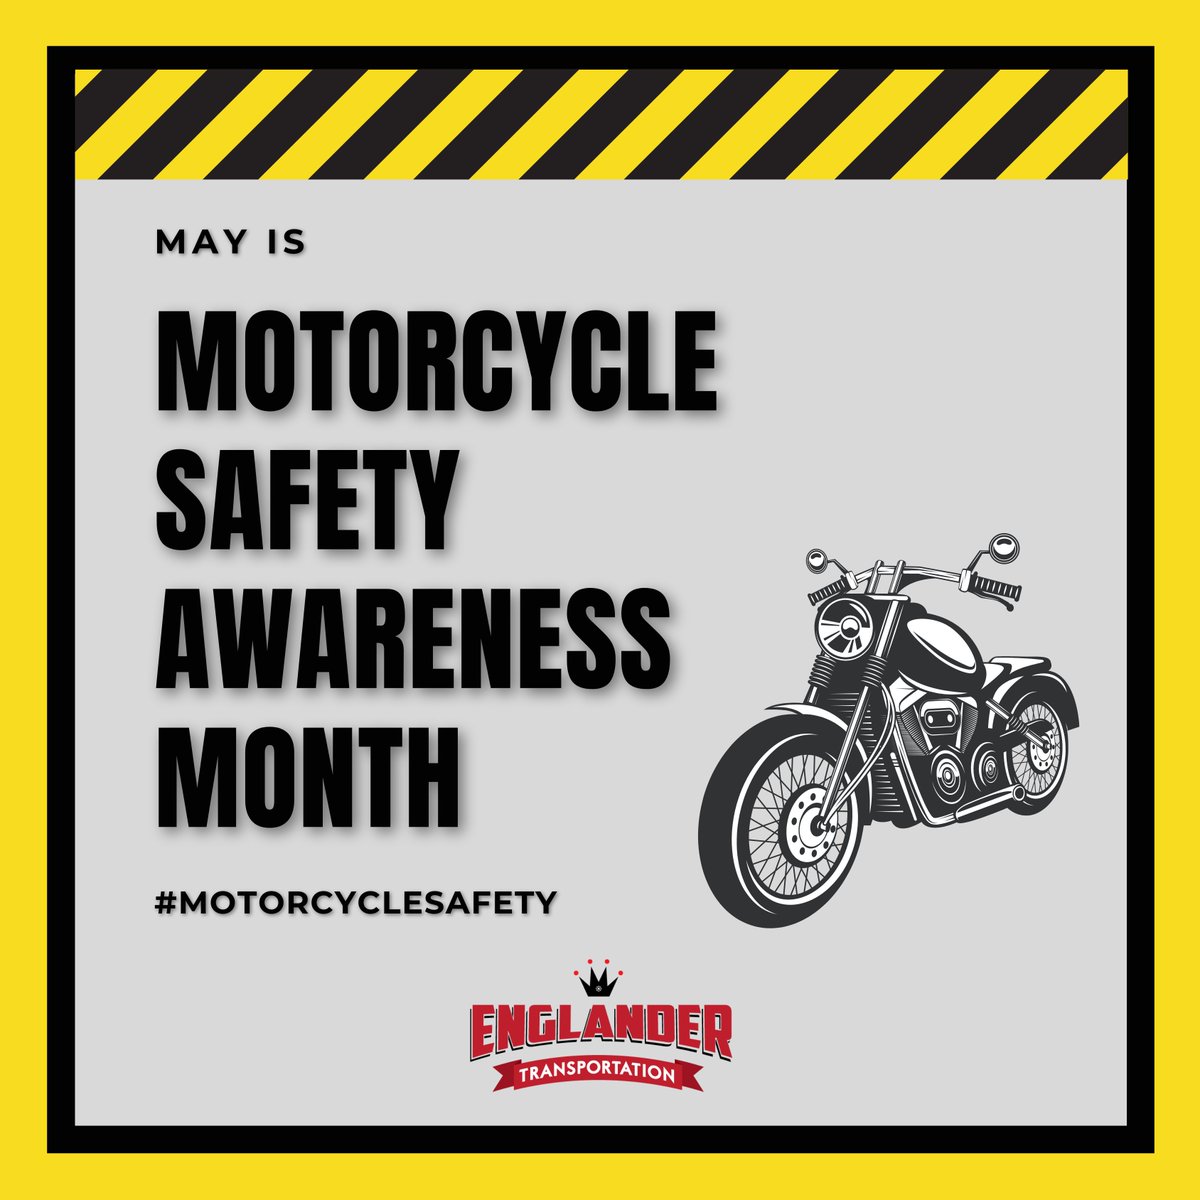 Warmer weather means more motorcycles on the road. Always remember to:

- Share the road
- Always be alert
- Check your blind spots
- Be extra cautious when passing
- Stay in your lane
- Use turn signals

#motorcyclesafety